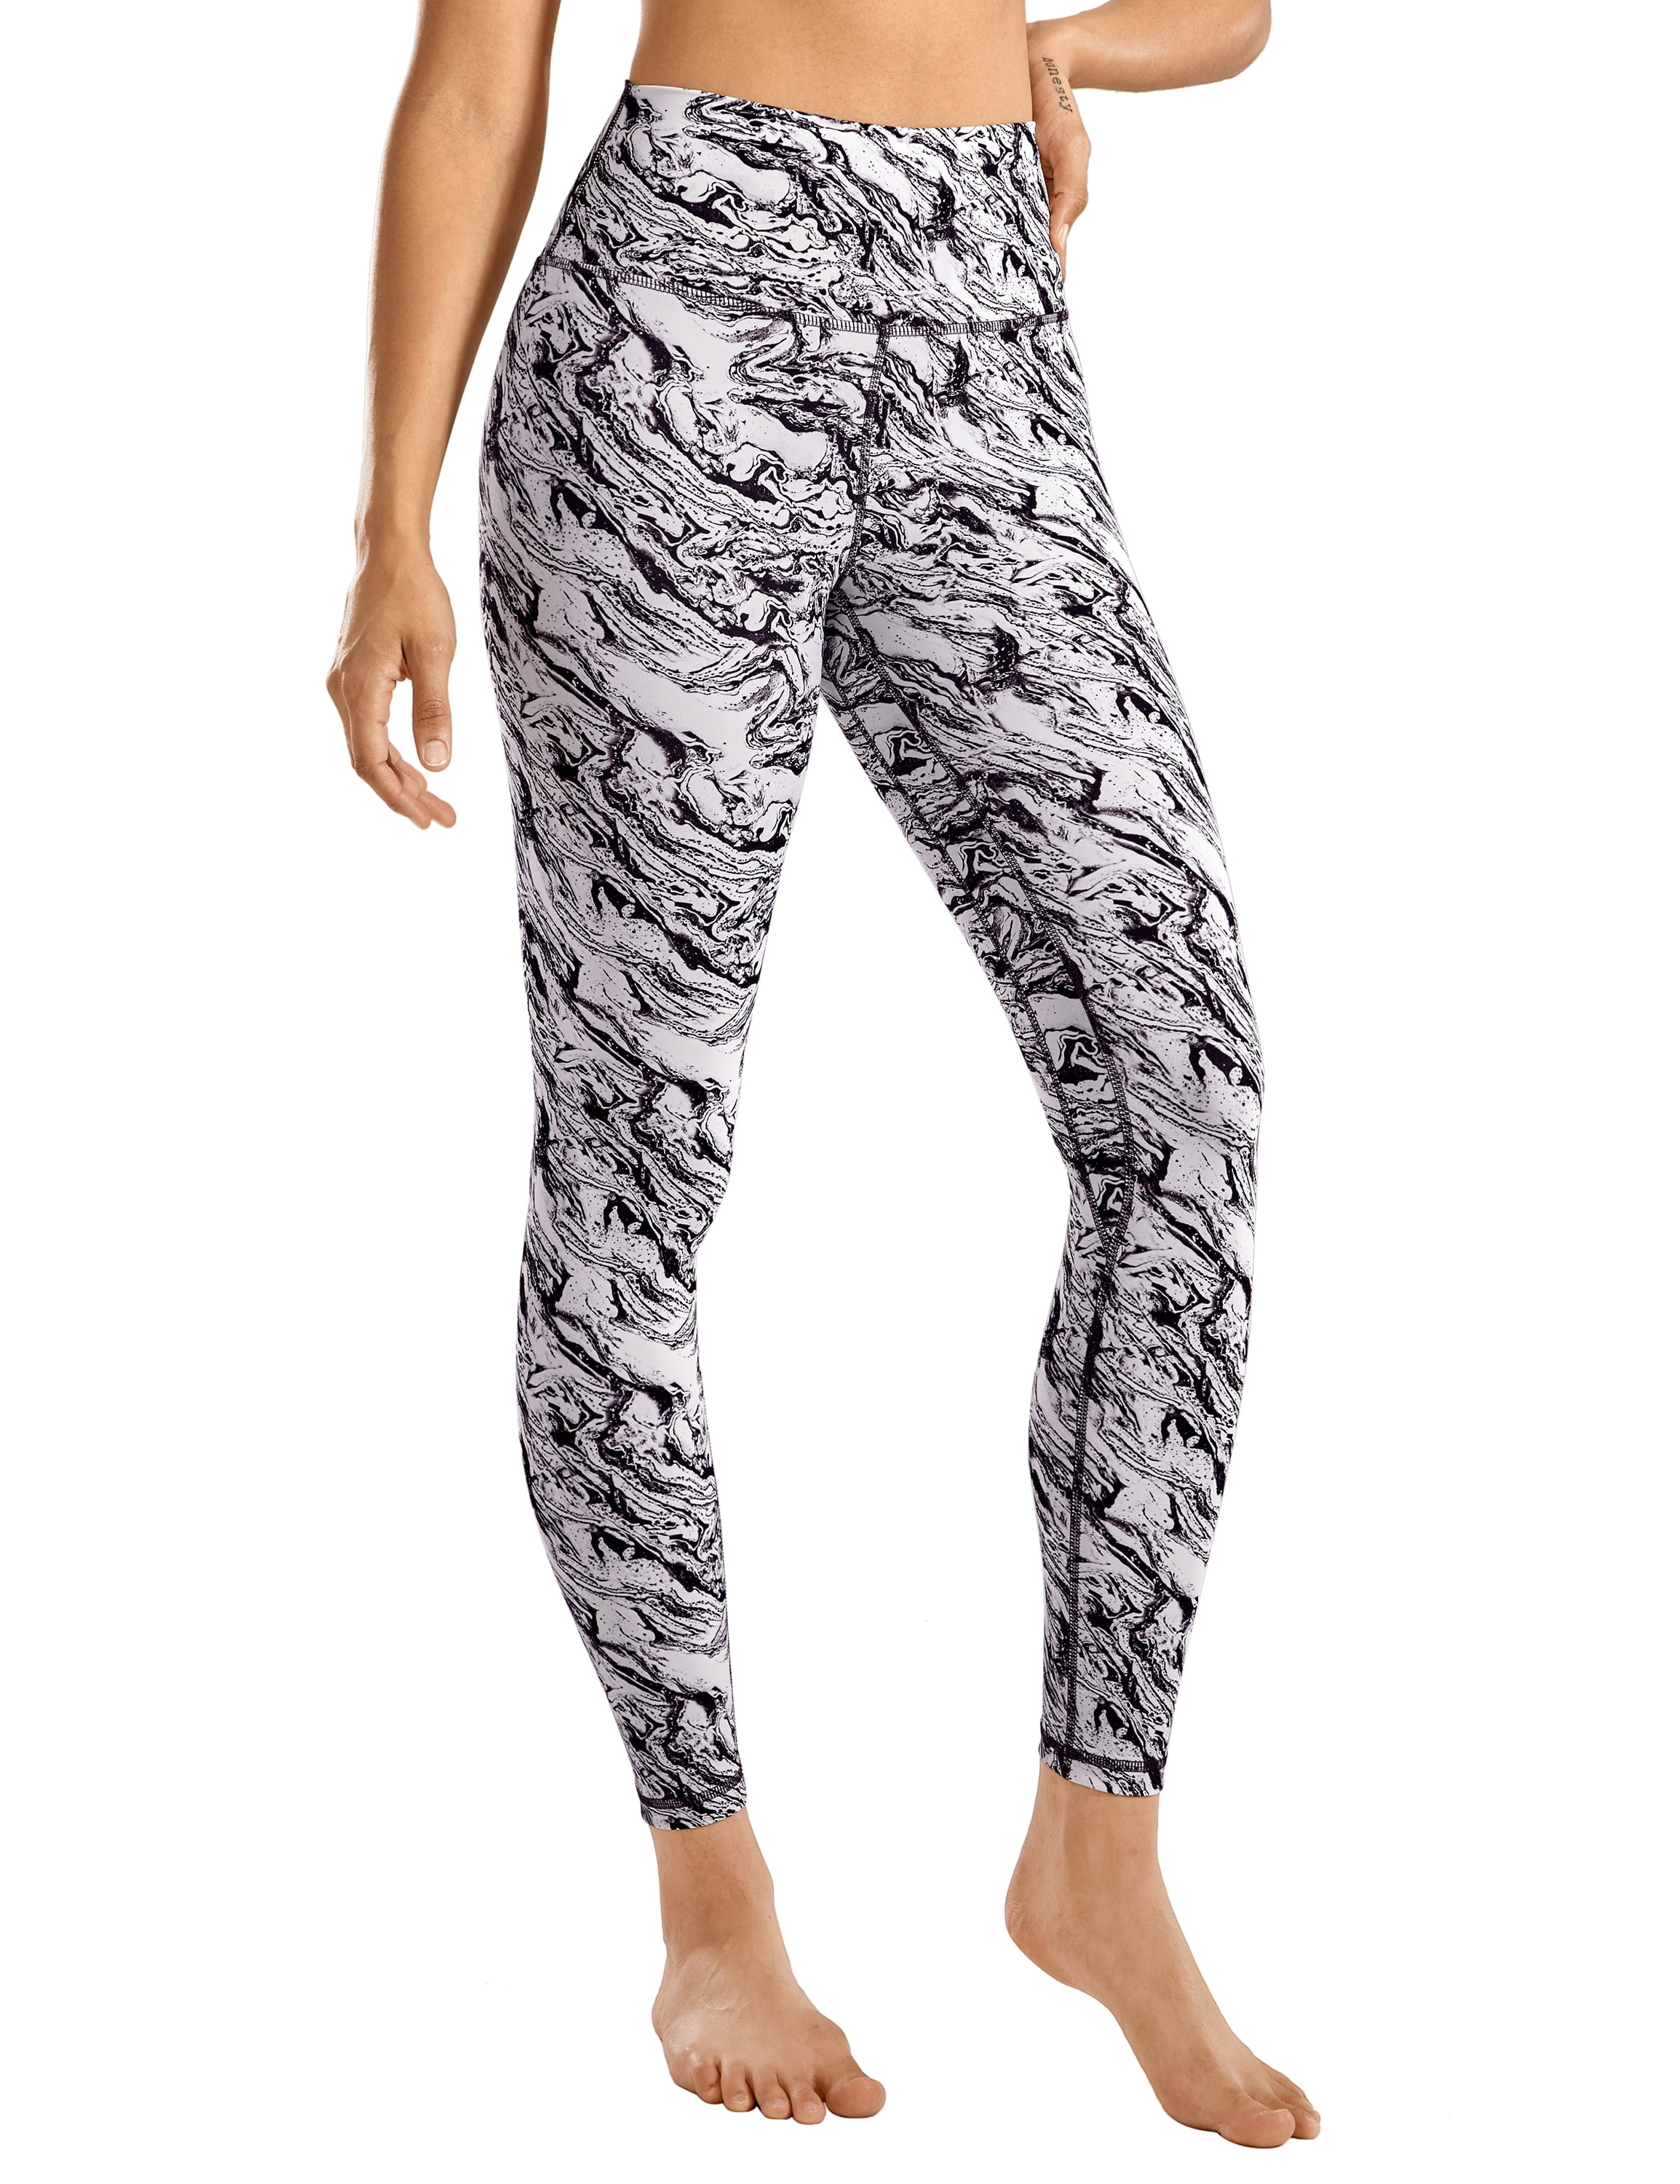 CRZ YOGA Womens High Waisted Offline Yoga Pants Naked Feeling, 7/8 Length,  25 Inches From Lu04, $26.38